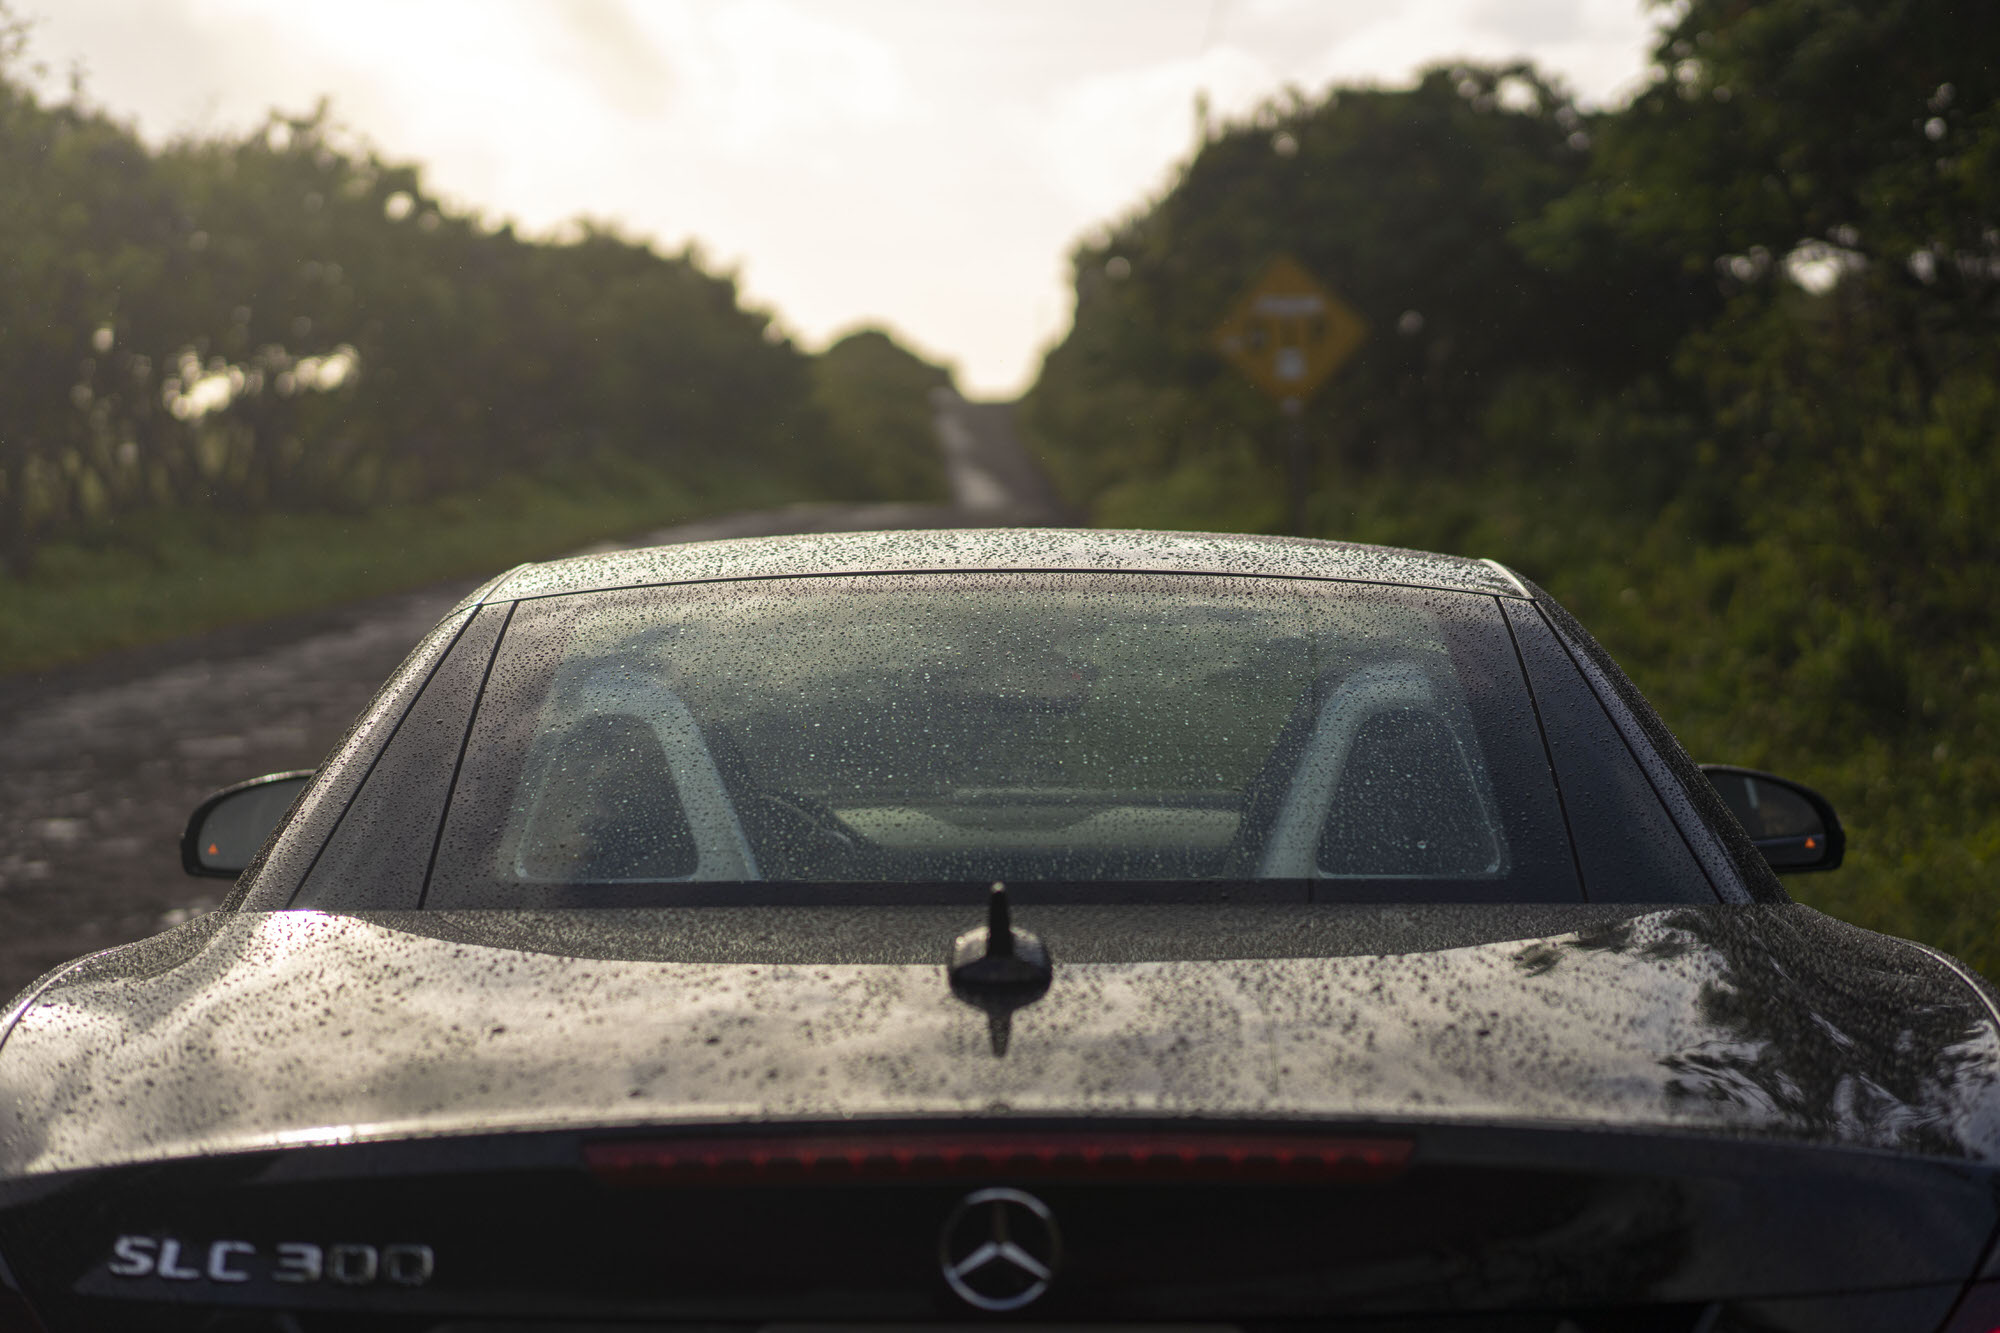 Rainy day in the Mercedes-Benz SLC 300 on the Road to Hana in Kula, Hawaii